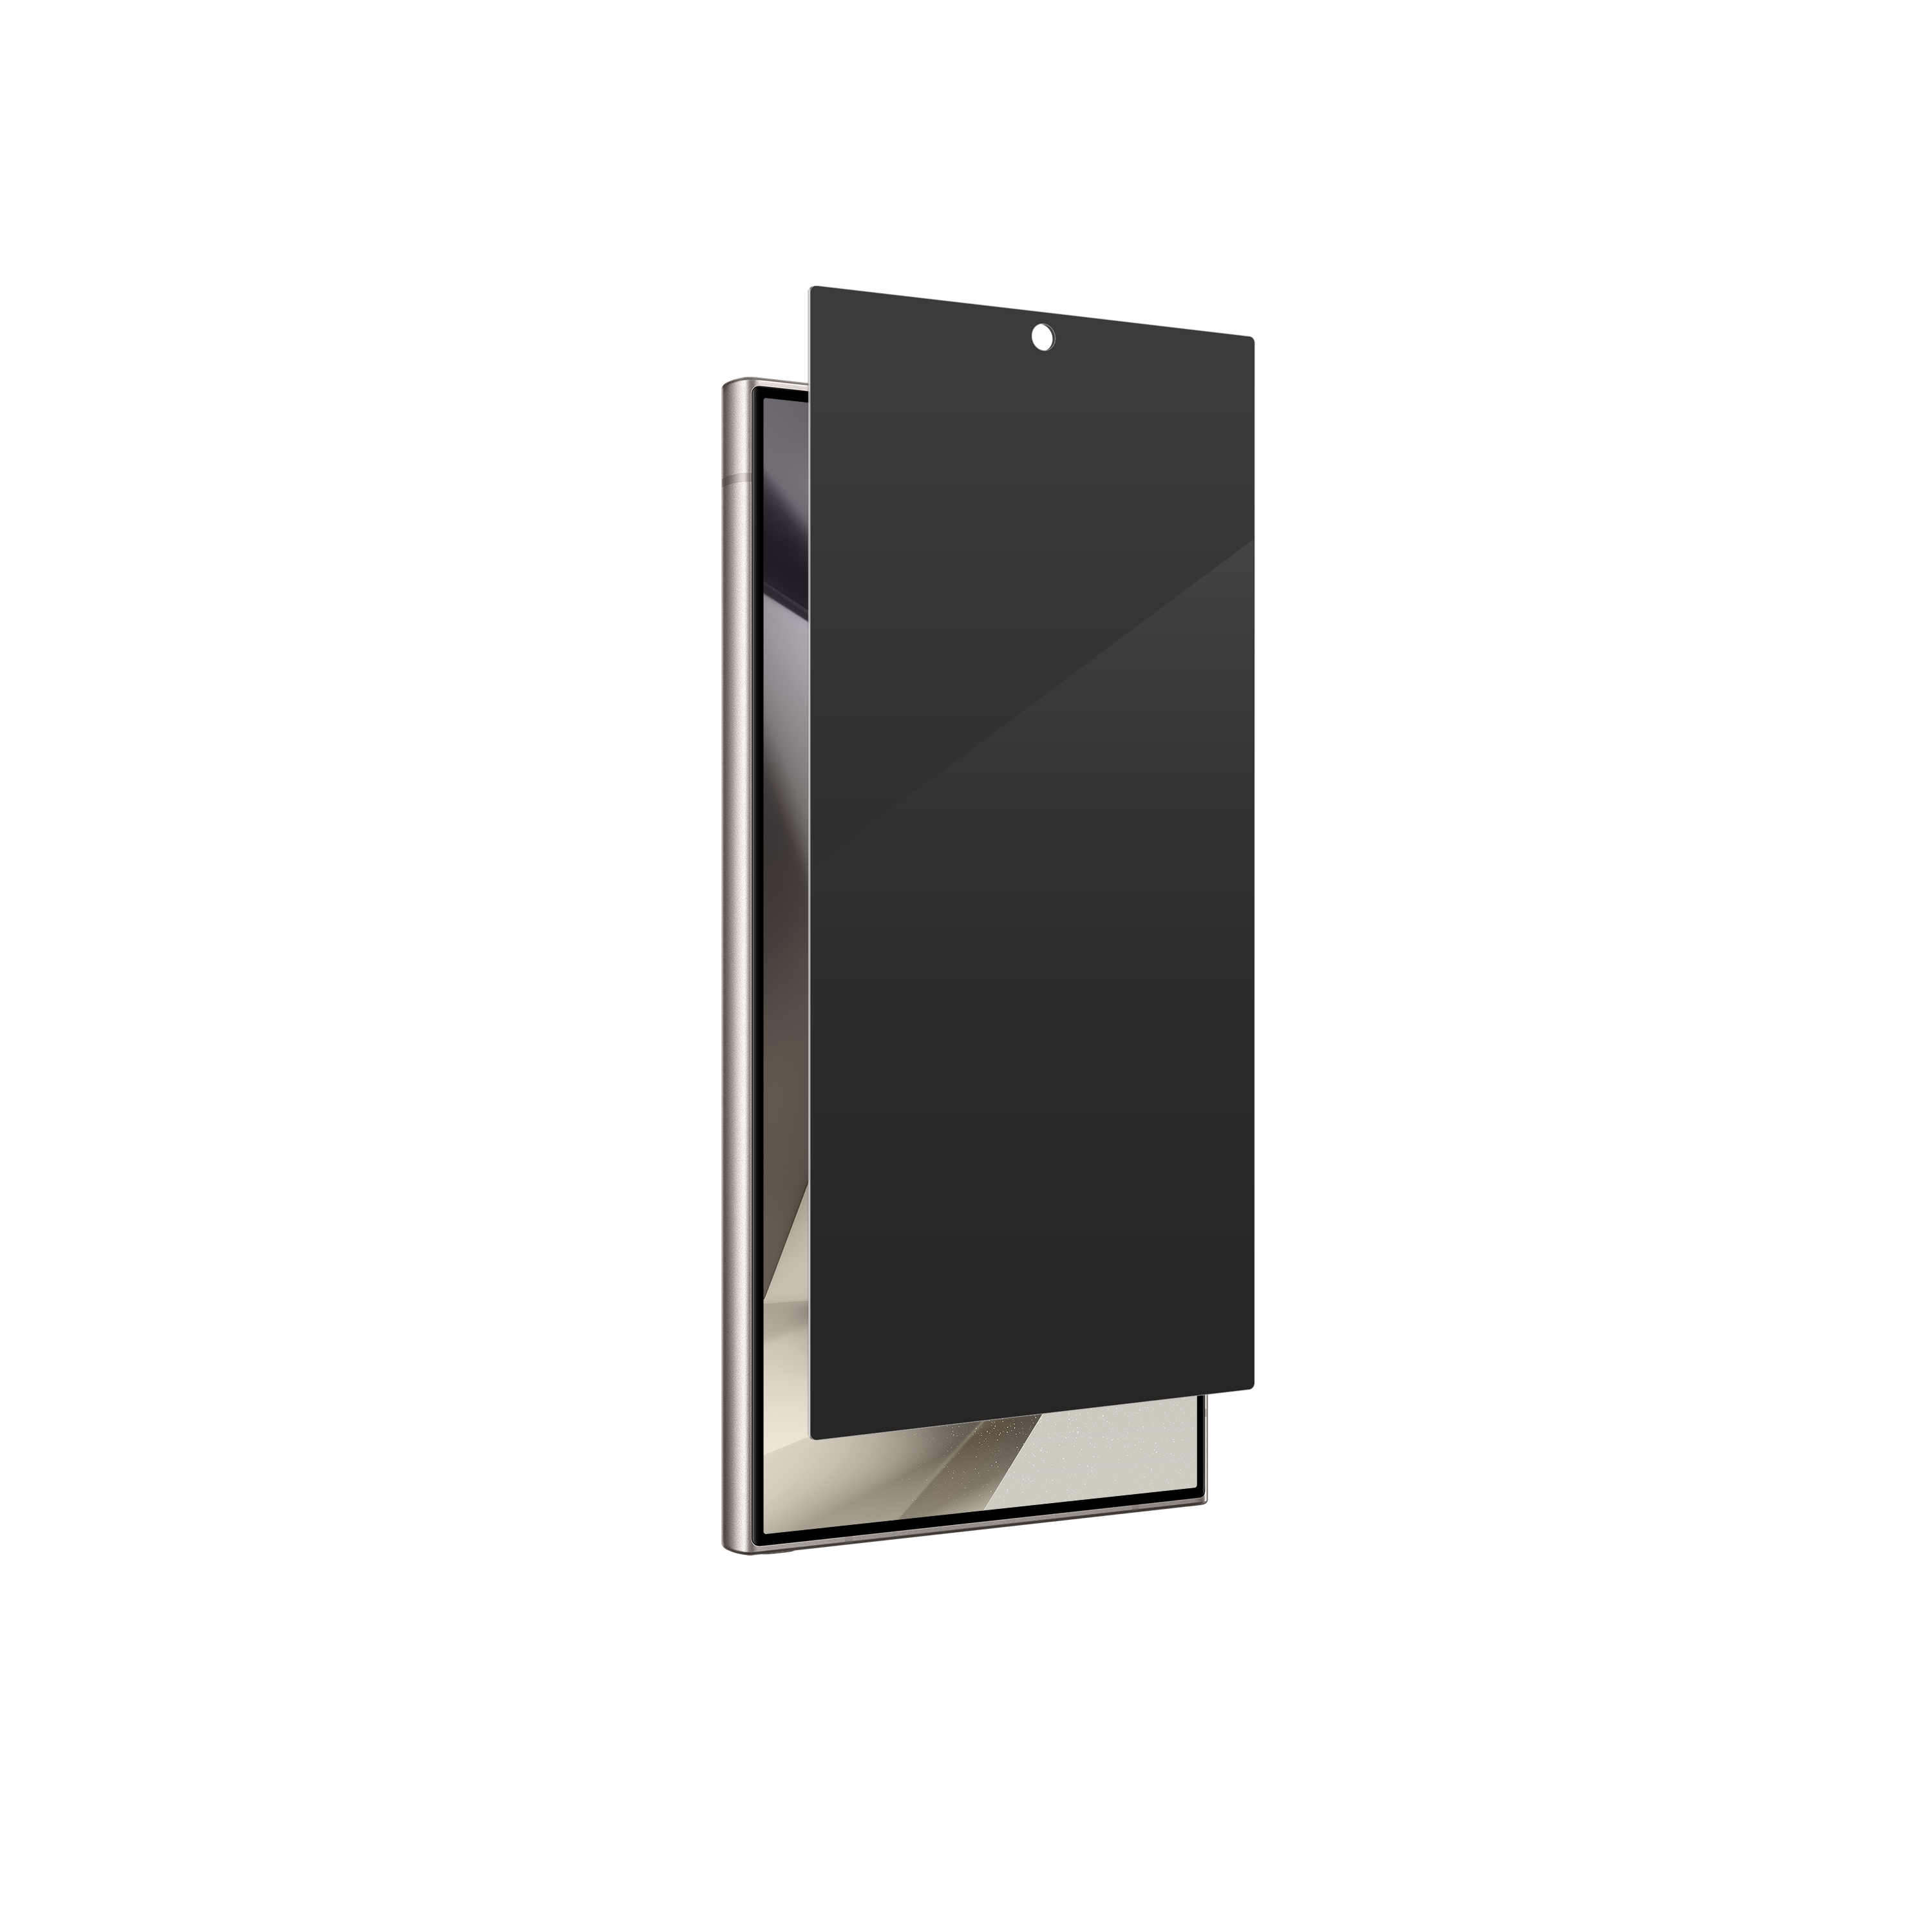 2-way Privacy Protection
|| A two-way filter provides full-screen privacy when viewed from the side.